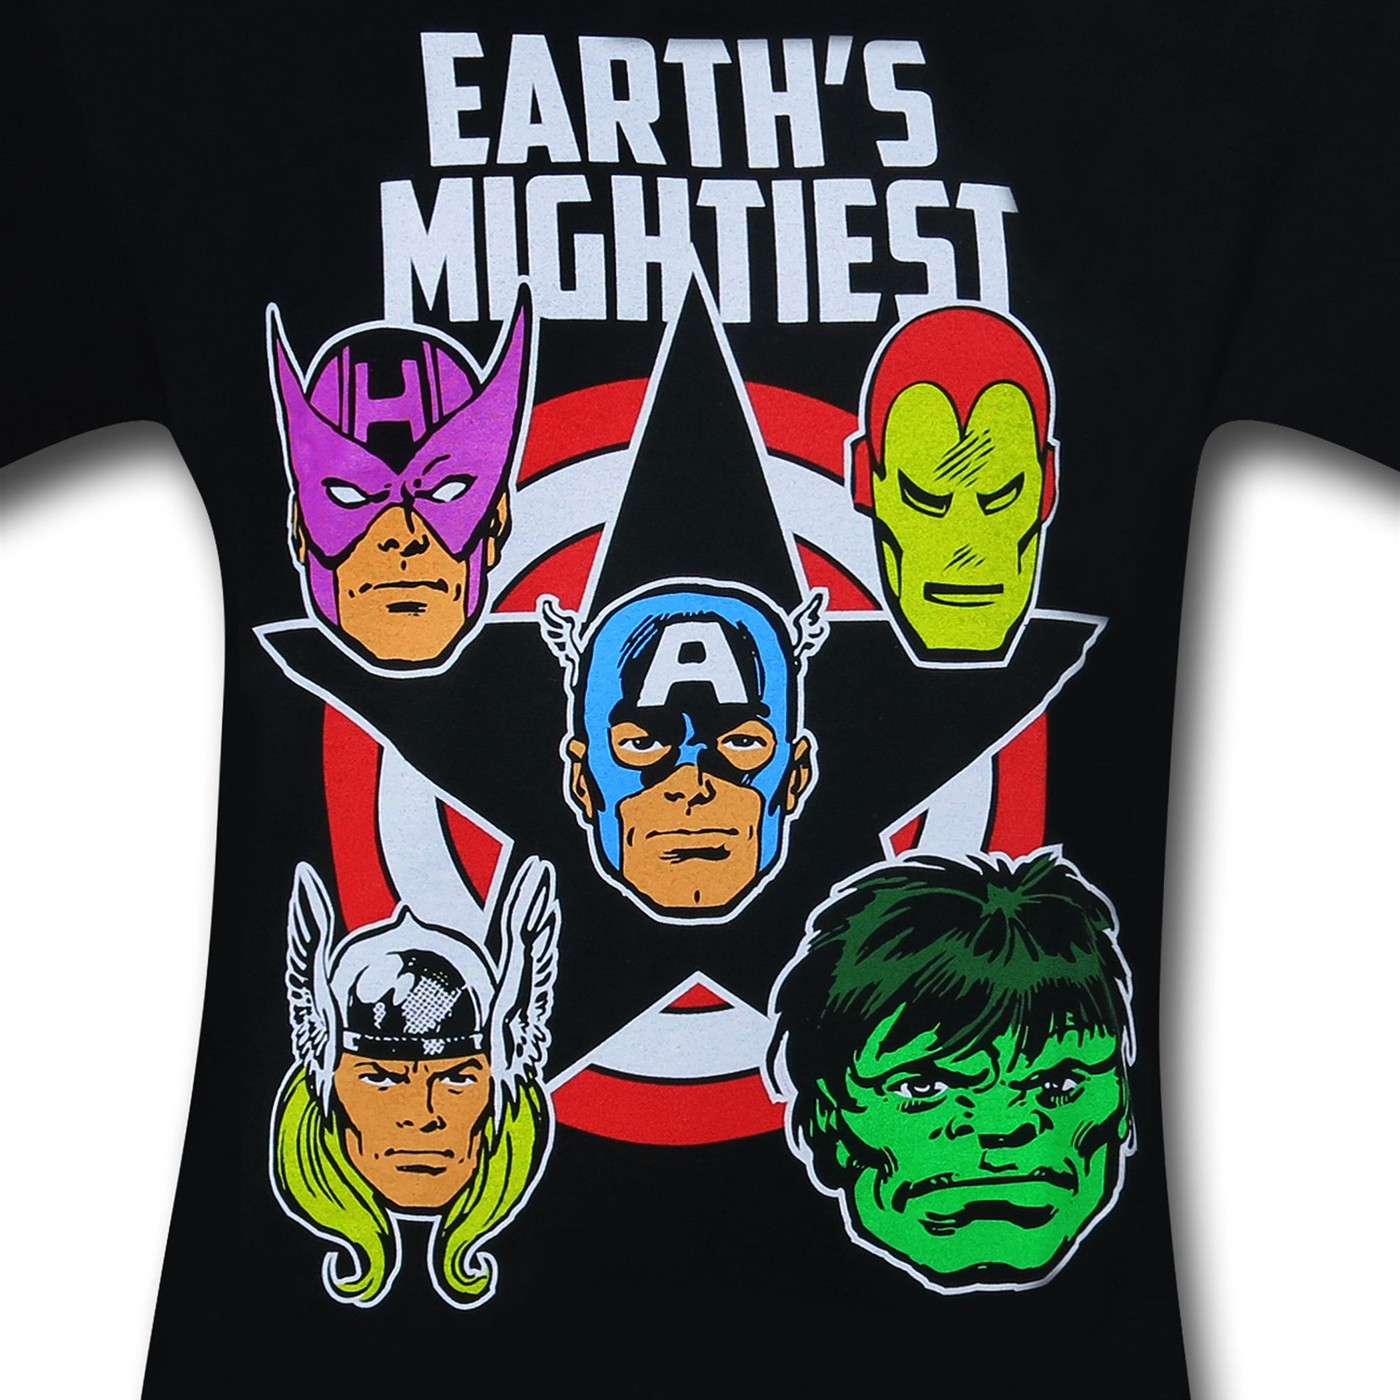 Avengers Earth's Mightiest Tour T-Shirt